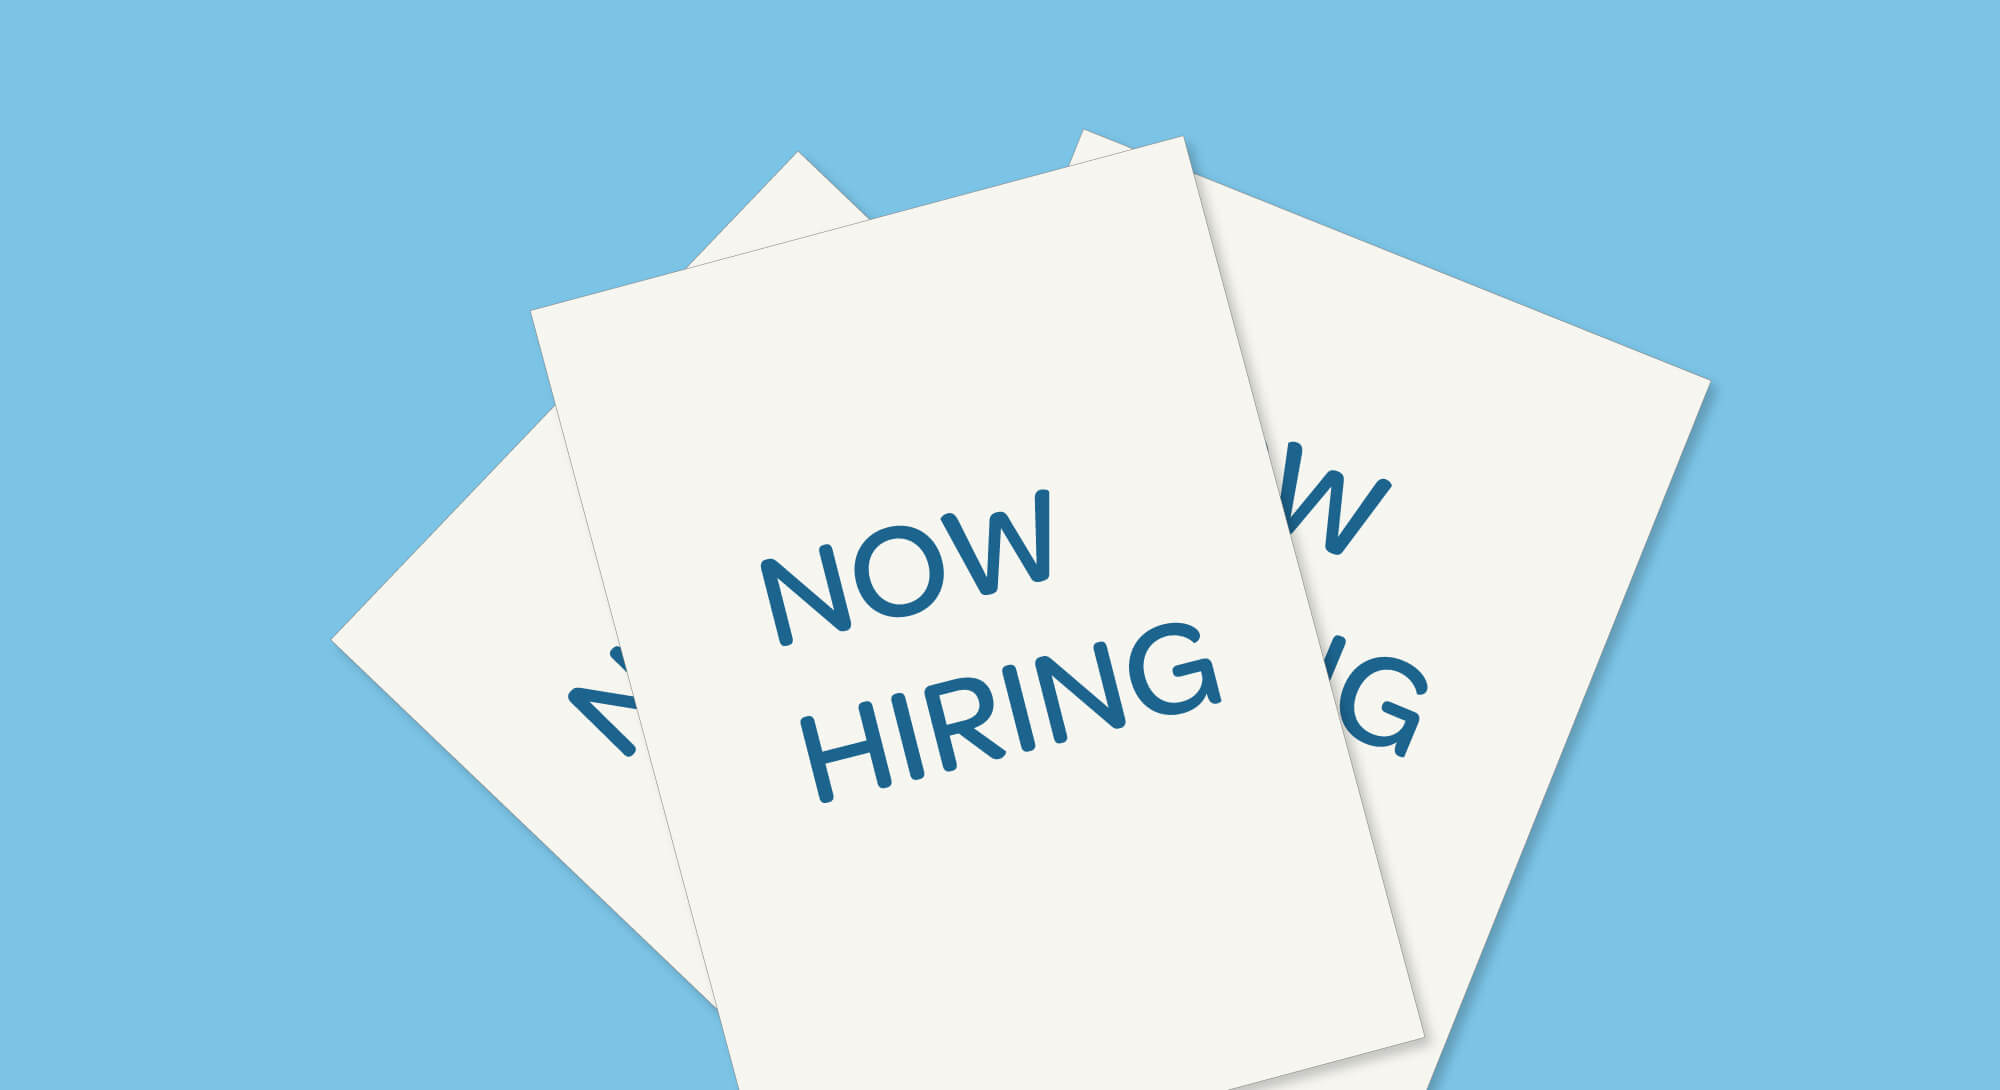 Three illustrated white pieces of paper with the words "Now hiring"